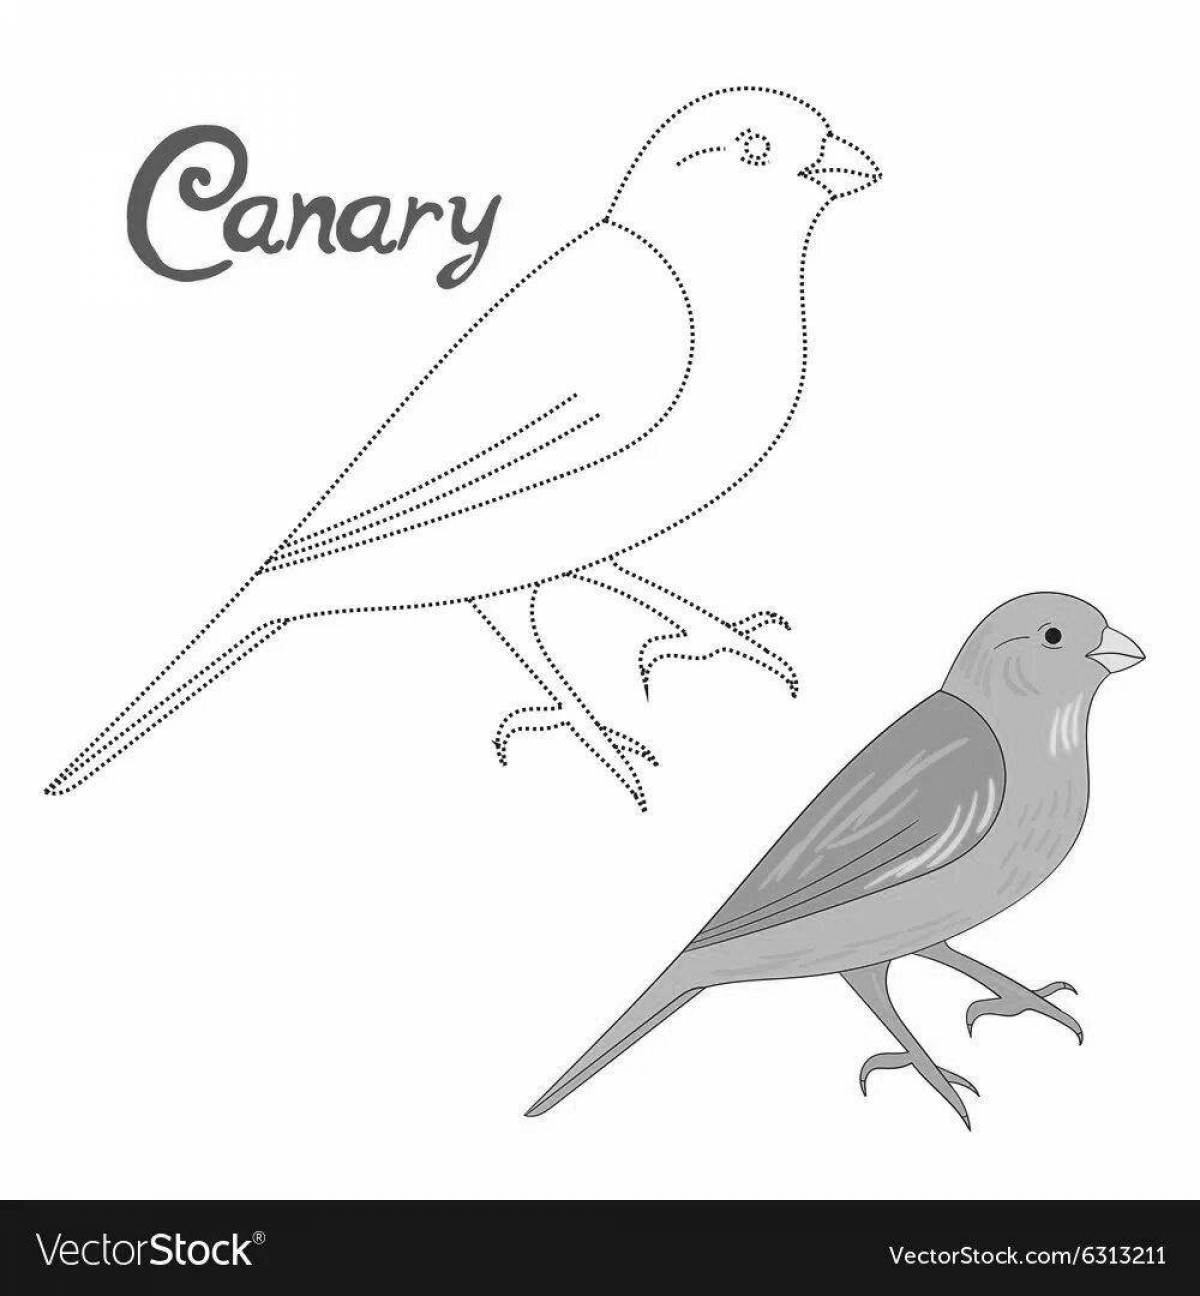 Glowing canary coloring page